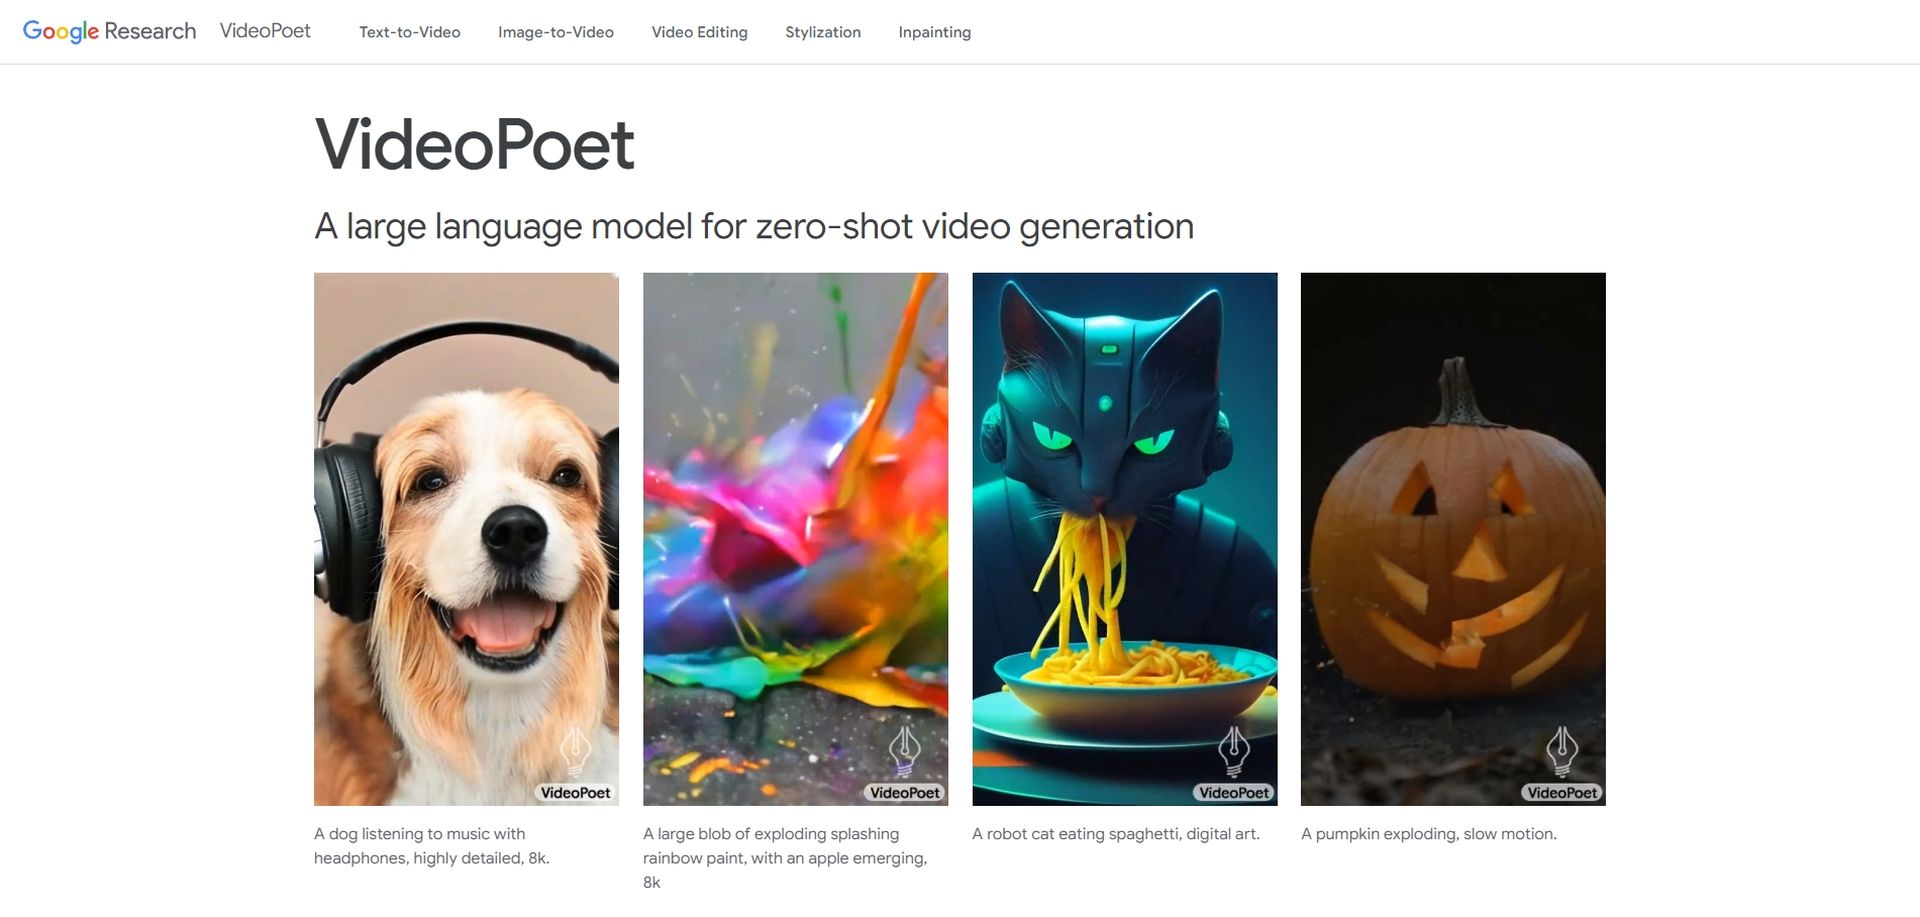 How to use Google VideoPoet